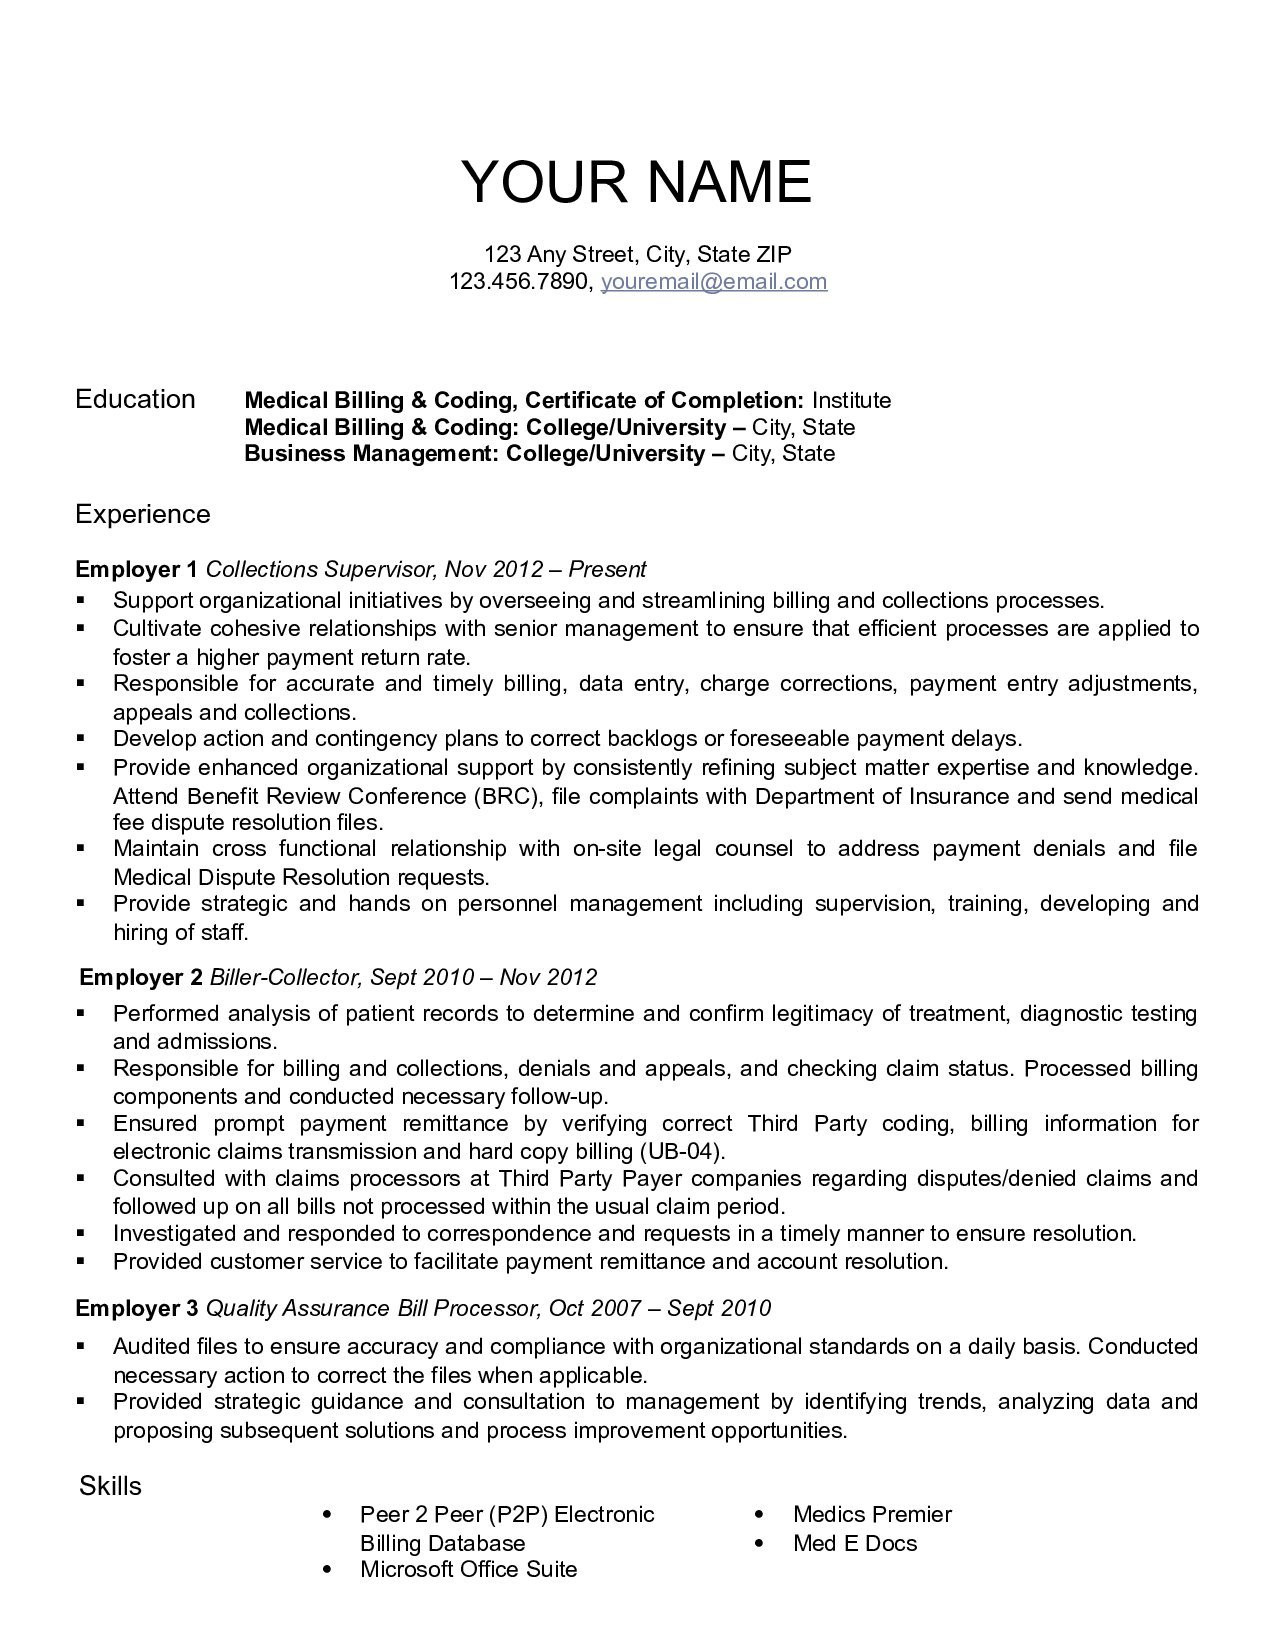 Medical Billing and Coding Resume Templates Medical Billing Resume